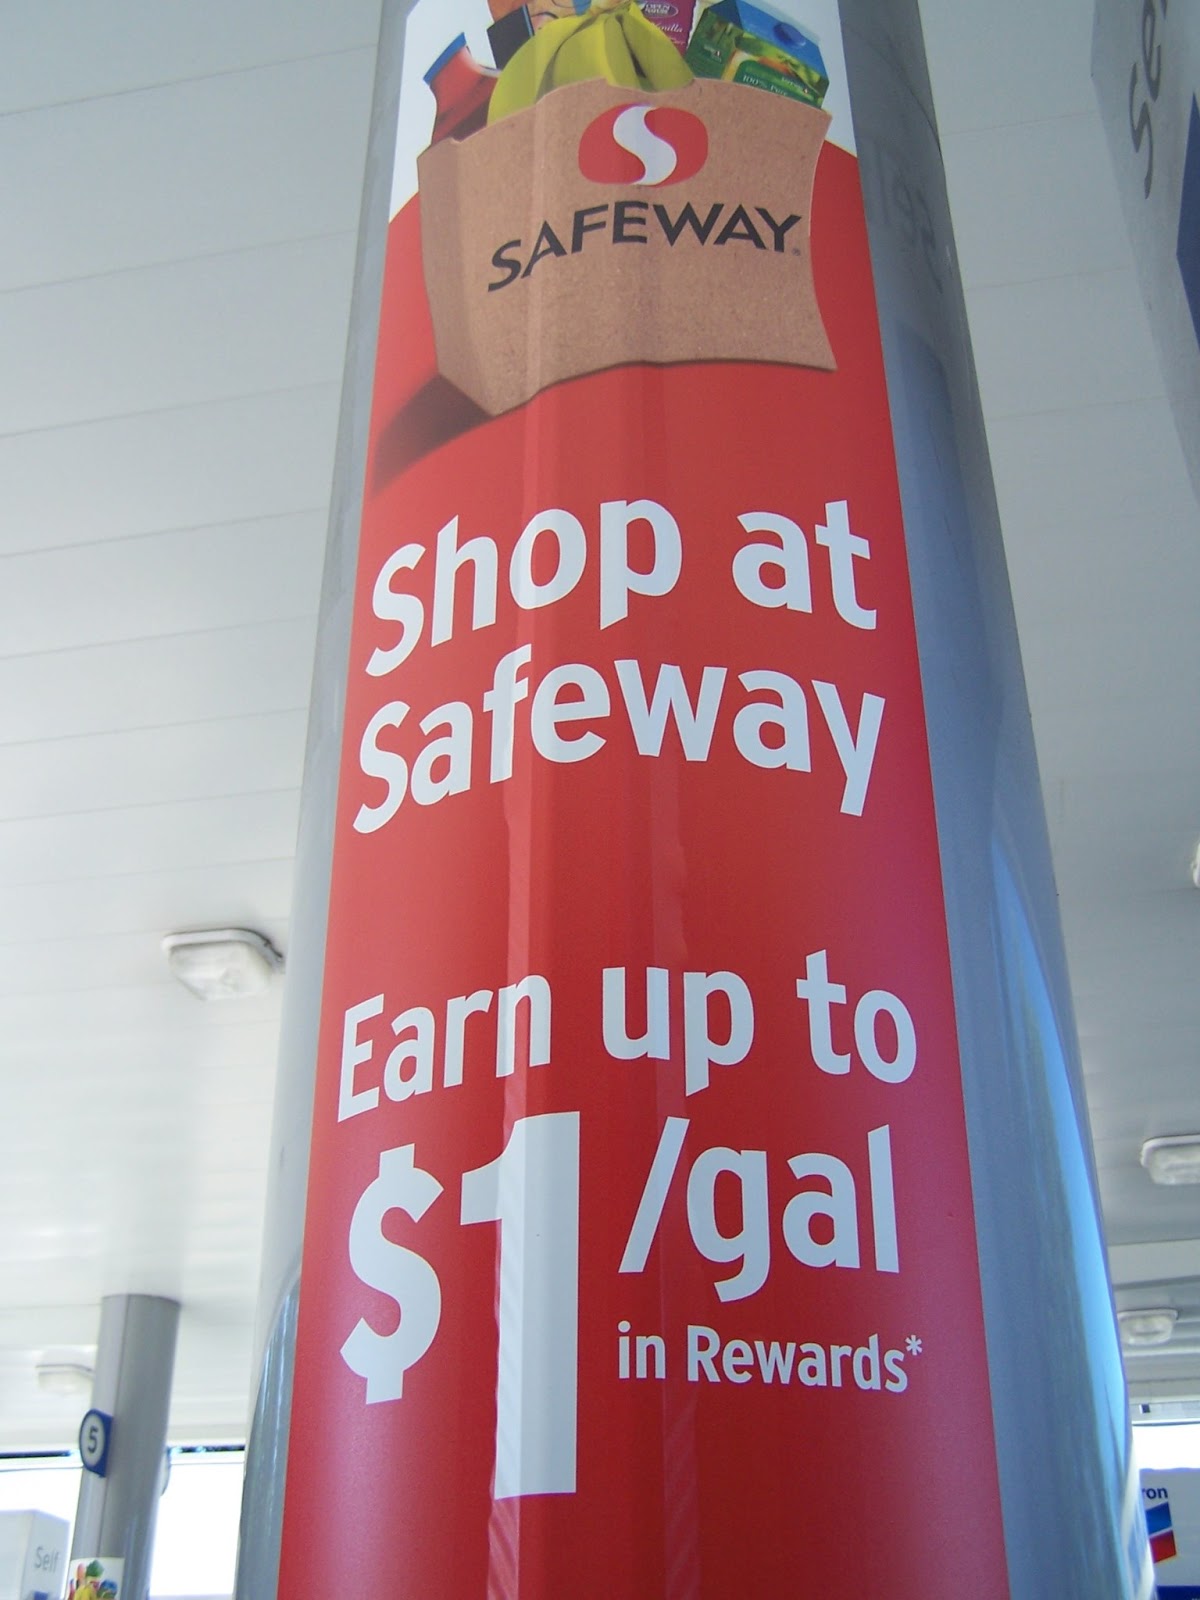 Did you know you can use your Safeway Gas Reward Points at